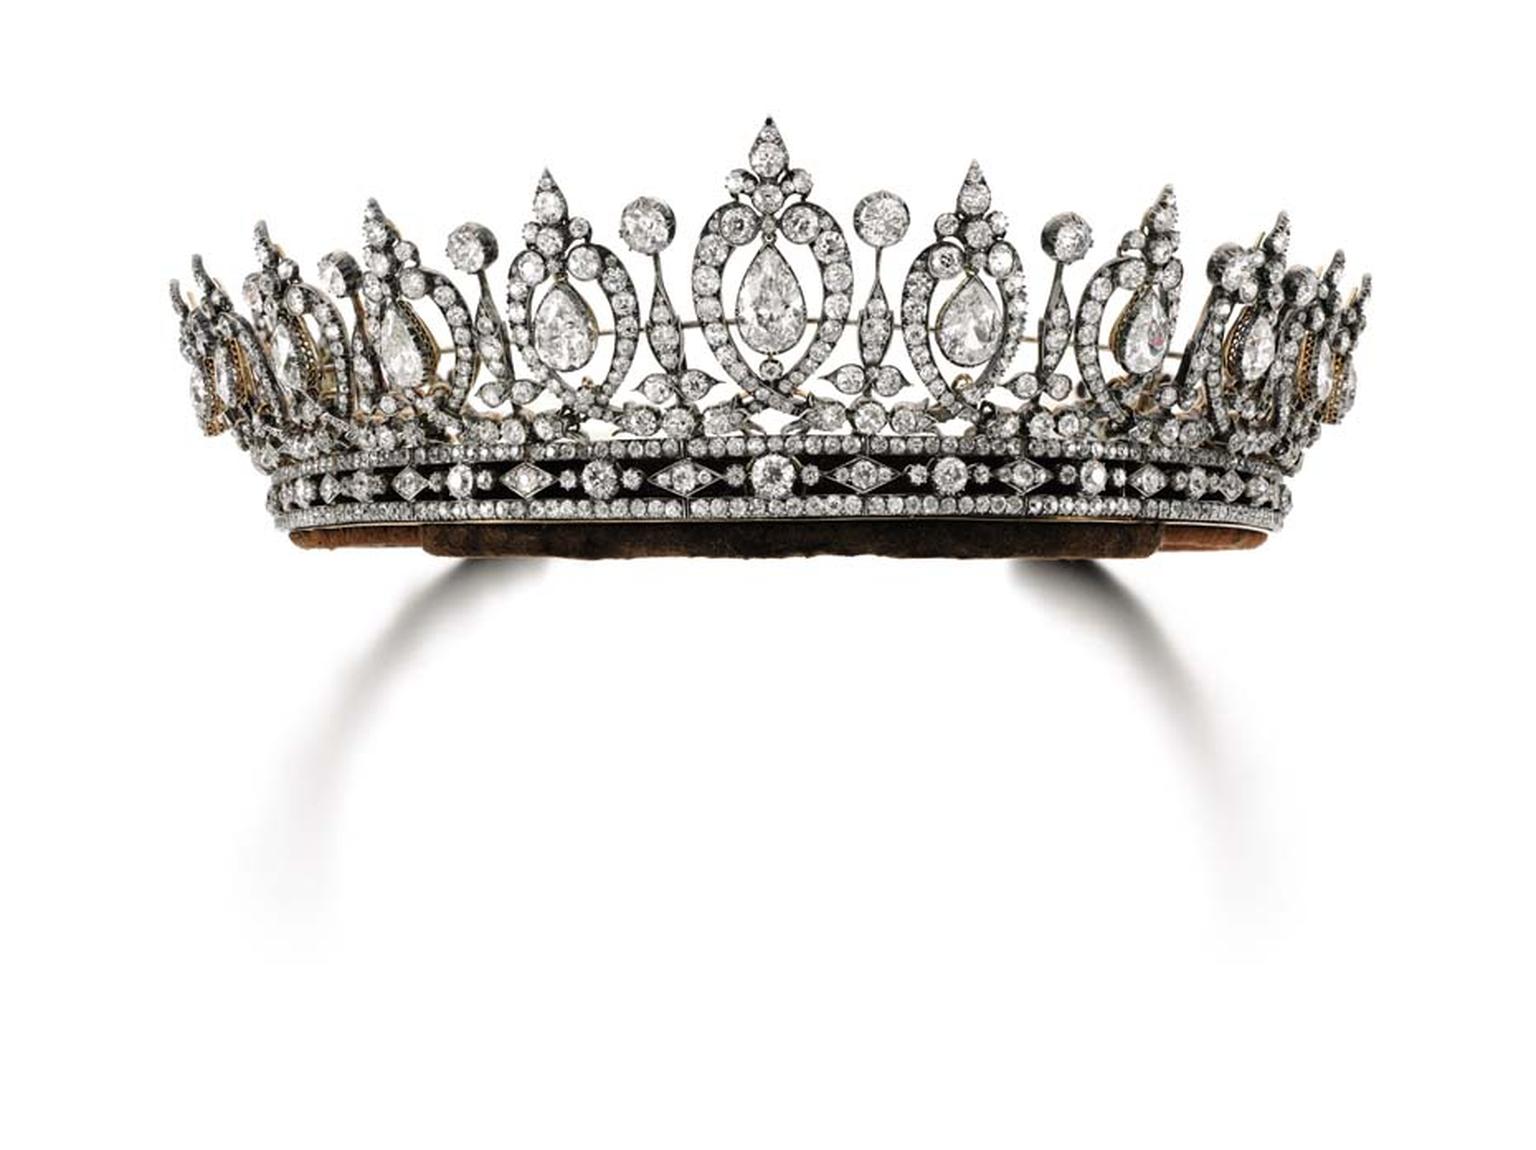 This intricate diamond tiara from the estate of the Duchess of Roxburghe, which will be auctioned by Sotheby's Geneva on 12 May, dates back to the last quarter of the 19th century and can also be worn as a necklace (estimate: $306-510,000).